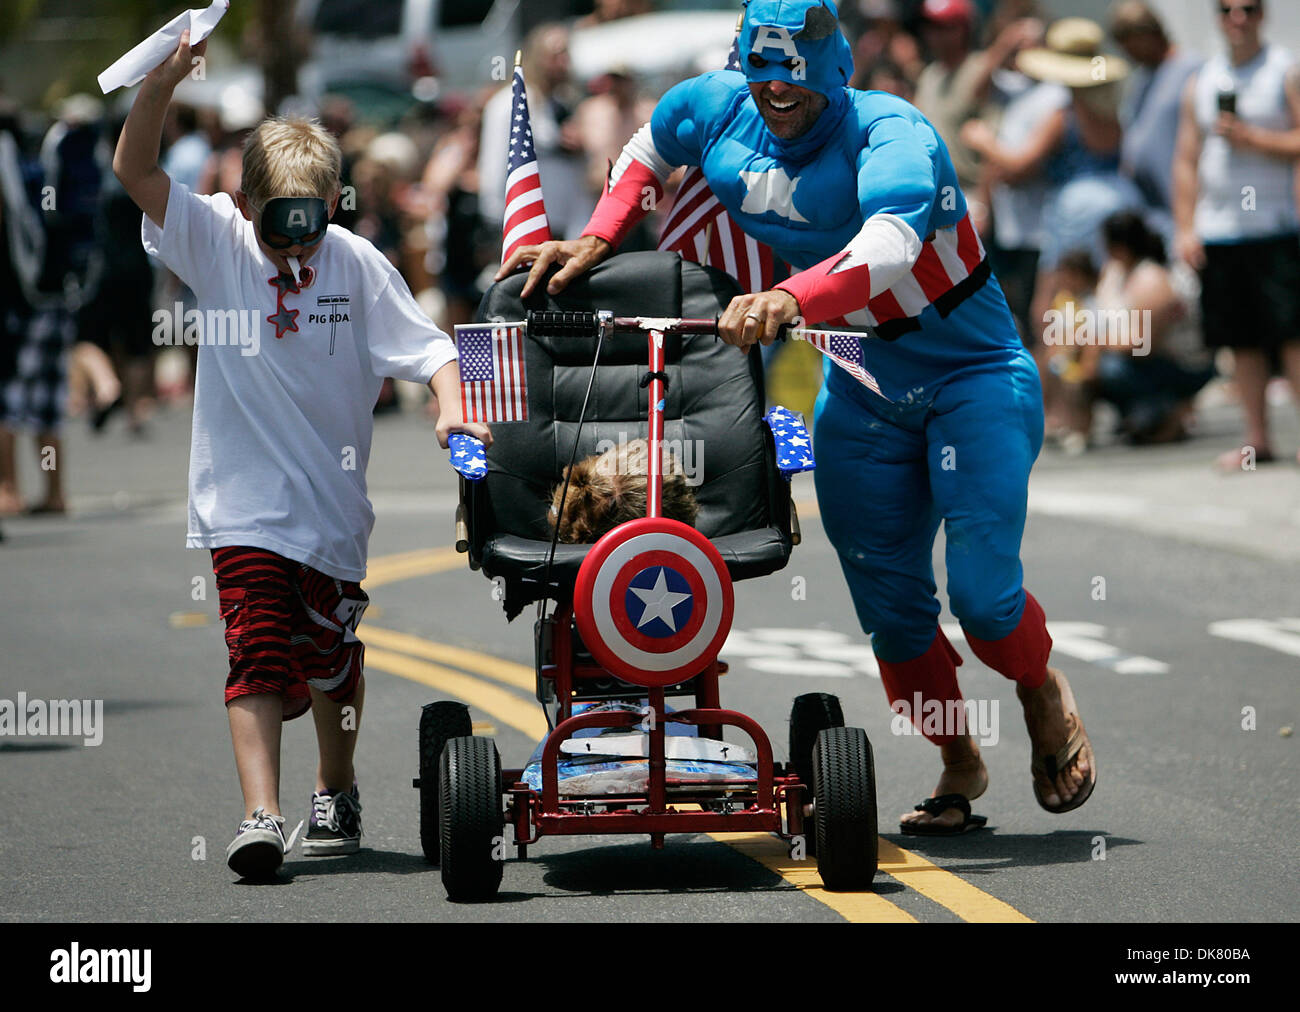 July 04, 2011 - San Clemente, California, U.S. - KEVIN WAGGONER pushes his 'office chair' up Avenida Rosa during the 6th annual Unofficial San Clemente Office Chair Races on Avenida Rosa.  Originally started with real office chairs, contest organizers now admit their definition of an office chair is ''loosely defined.''  The annual Fourth of July event attracts a couple of hundred  Stock Photo